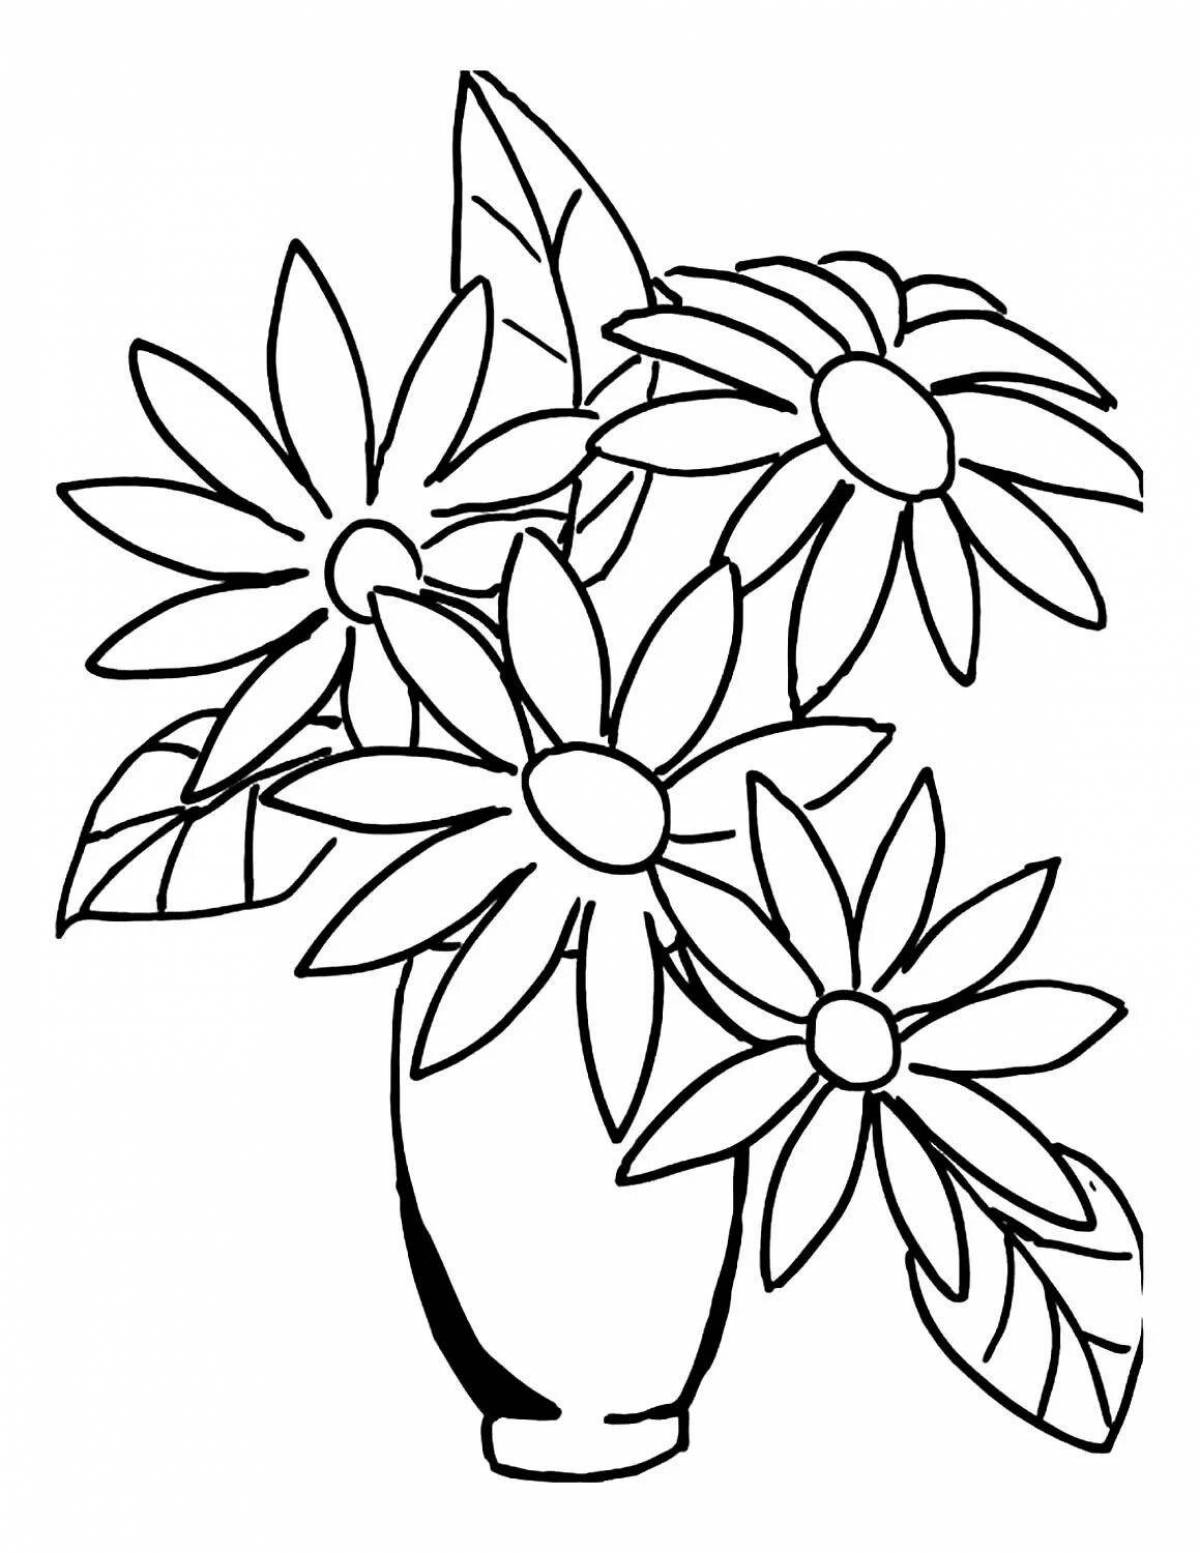 Coloring book luxurious large flowers in a vase